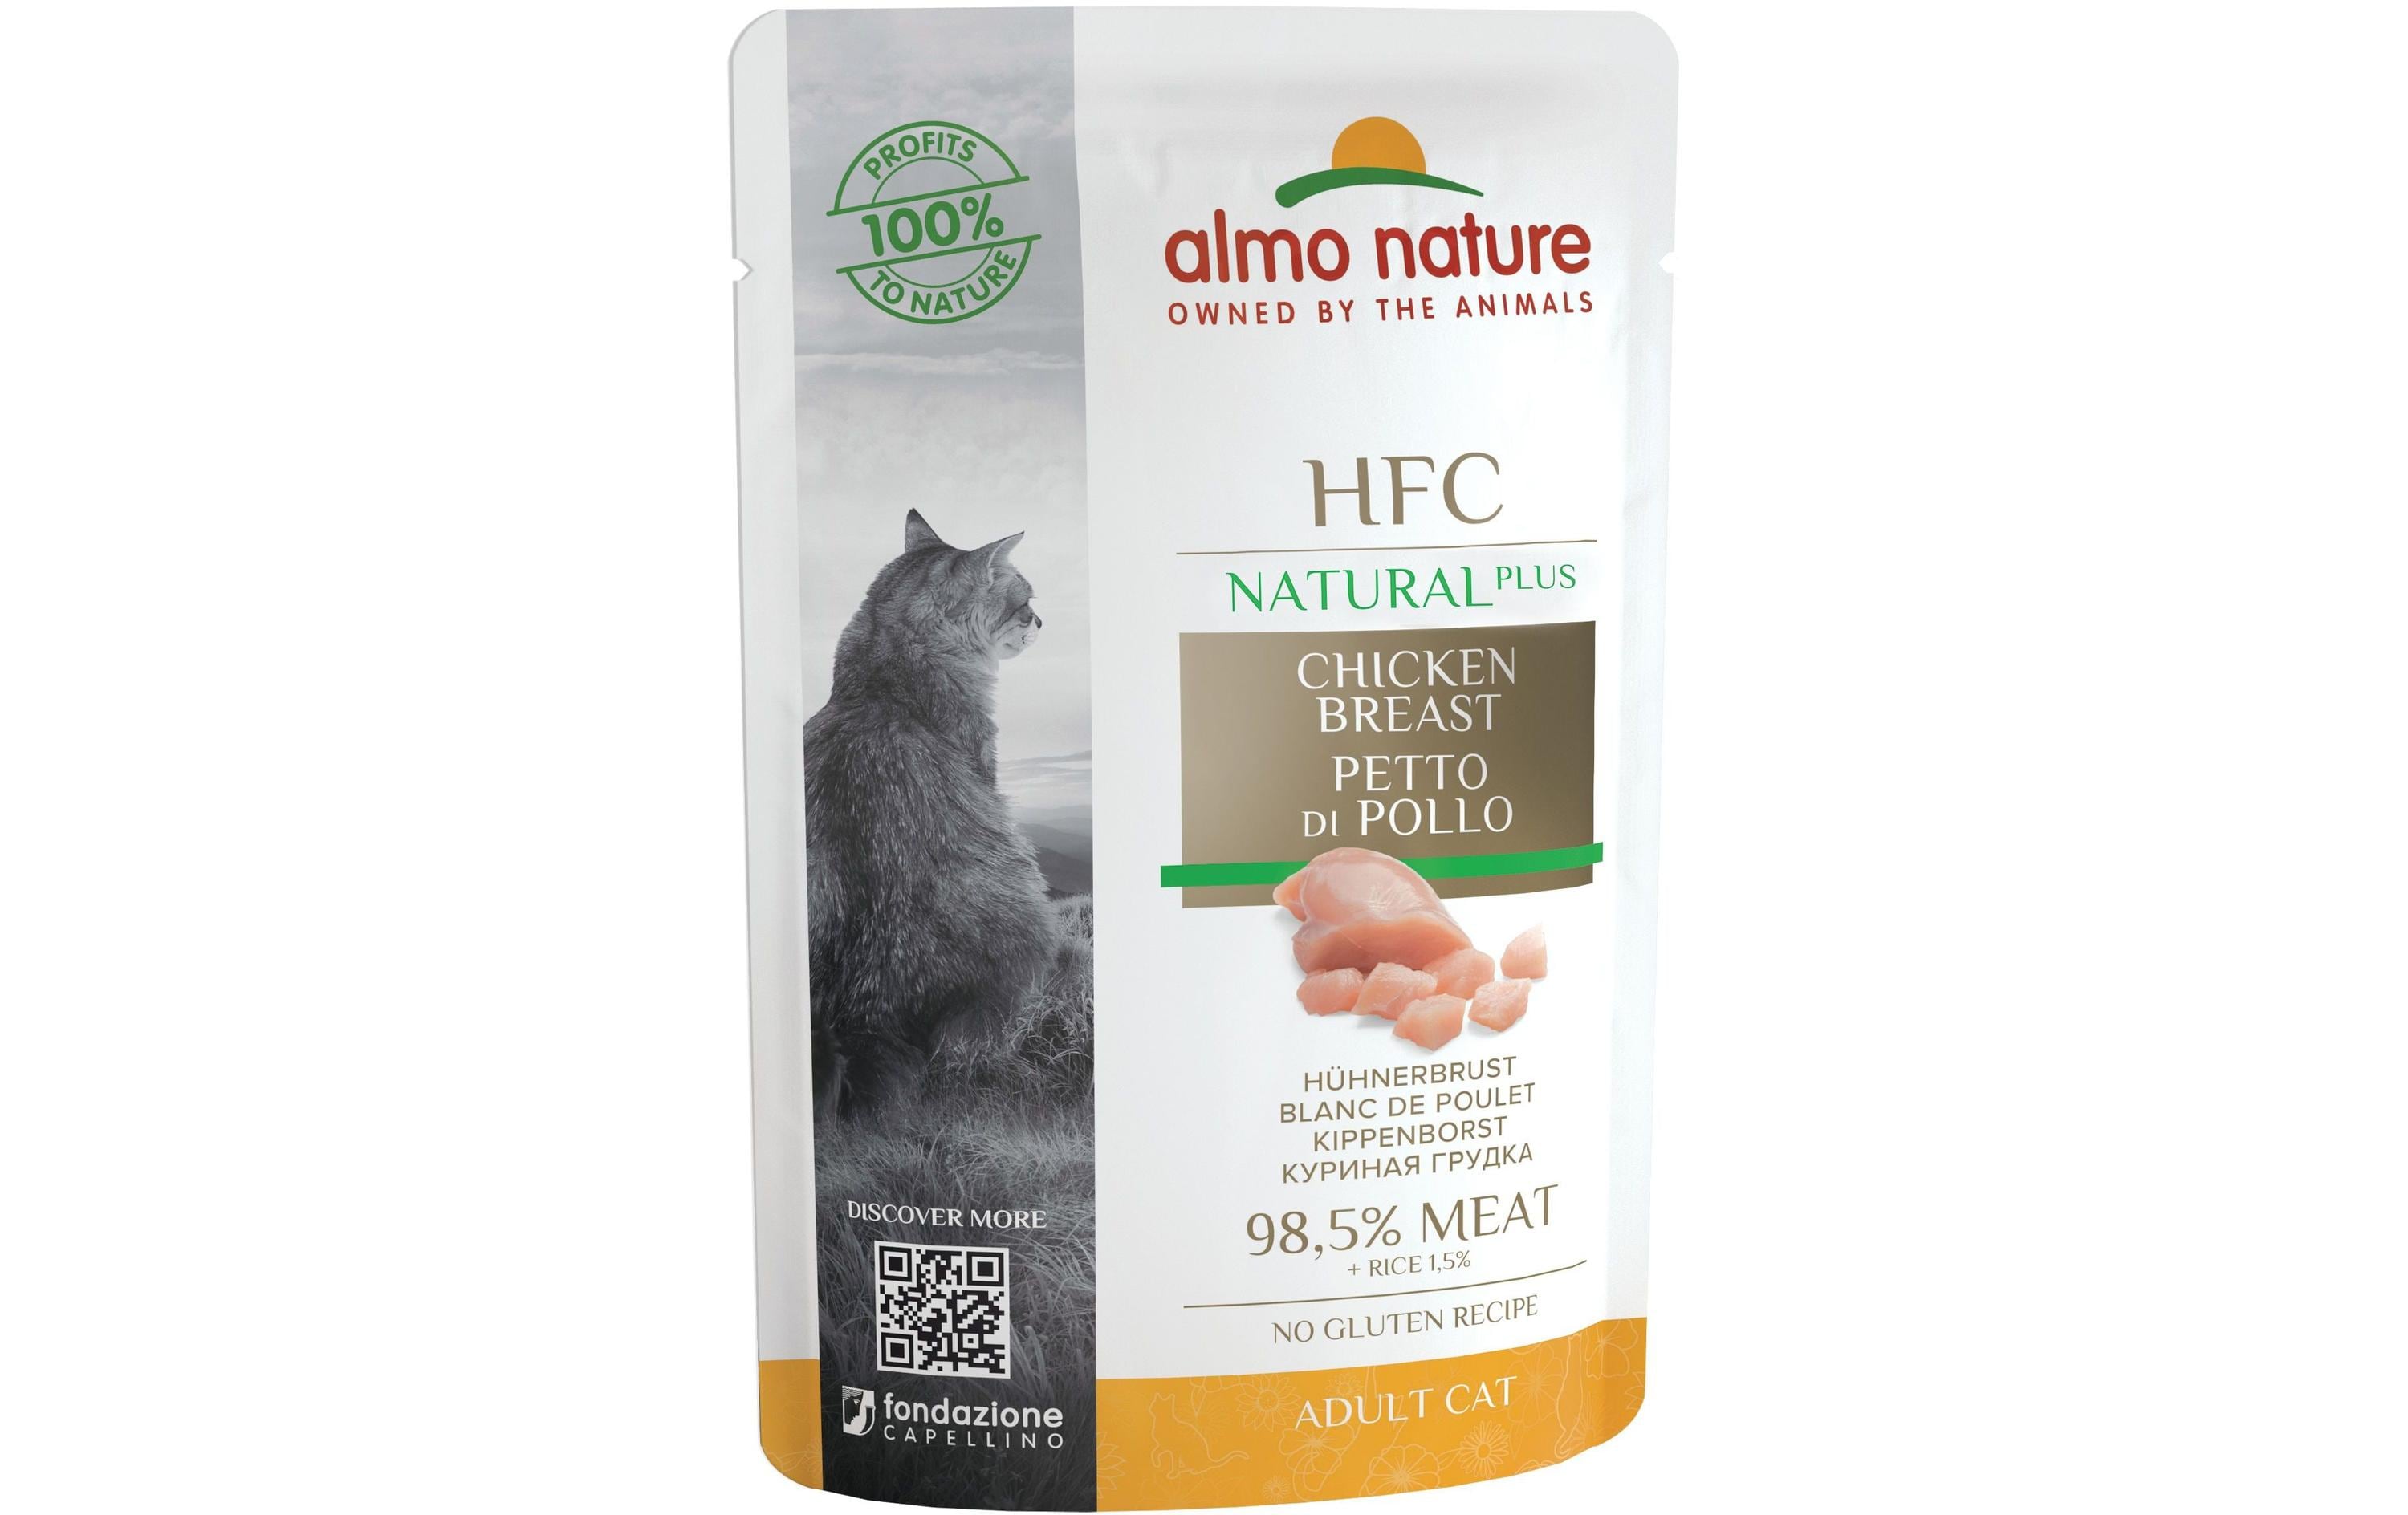 Almo Nature Nassfutter HFC Natural Plus Hühnerbrust, 24 x 55g